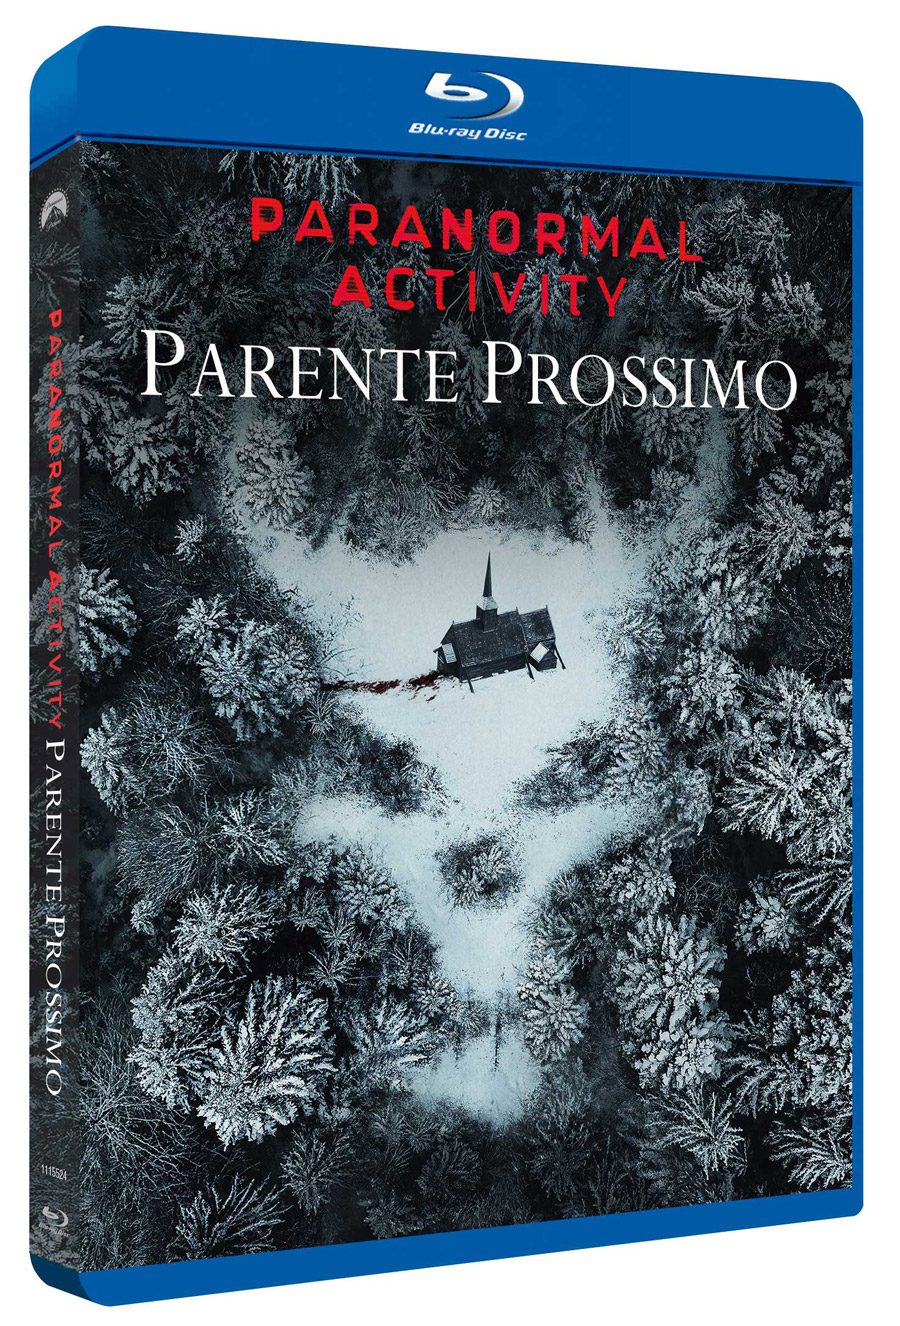 Paranormal Activity - Parente Prossimo in Blu-ray